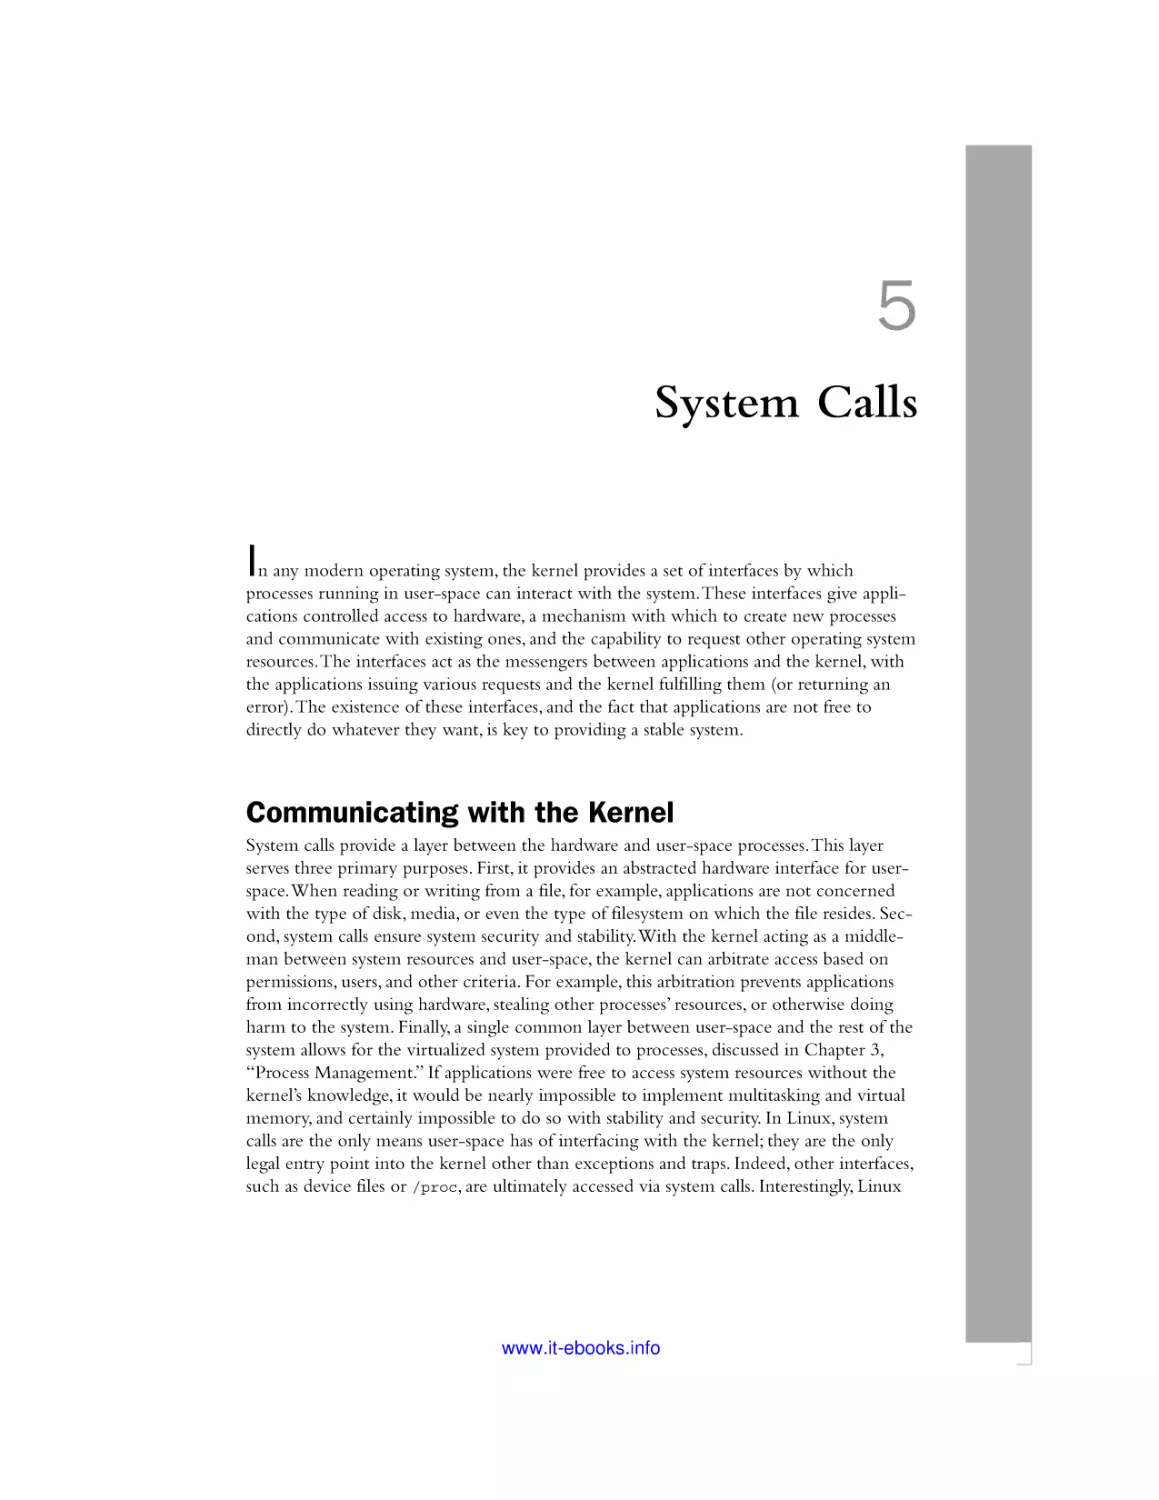 5 System Calls
Communicating with the Kernel